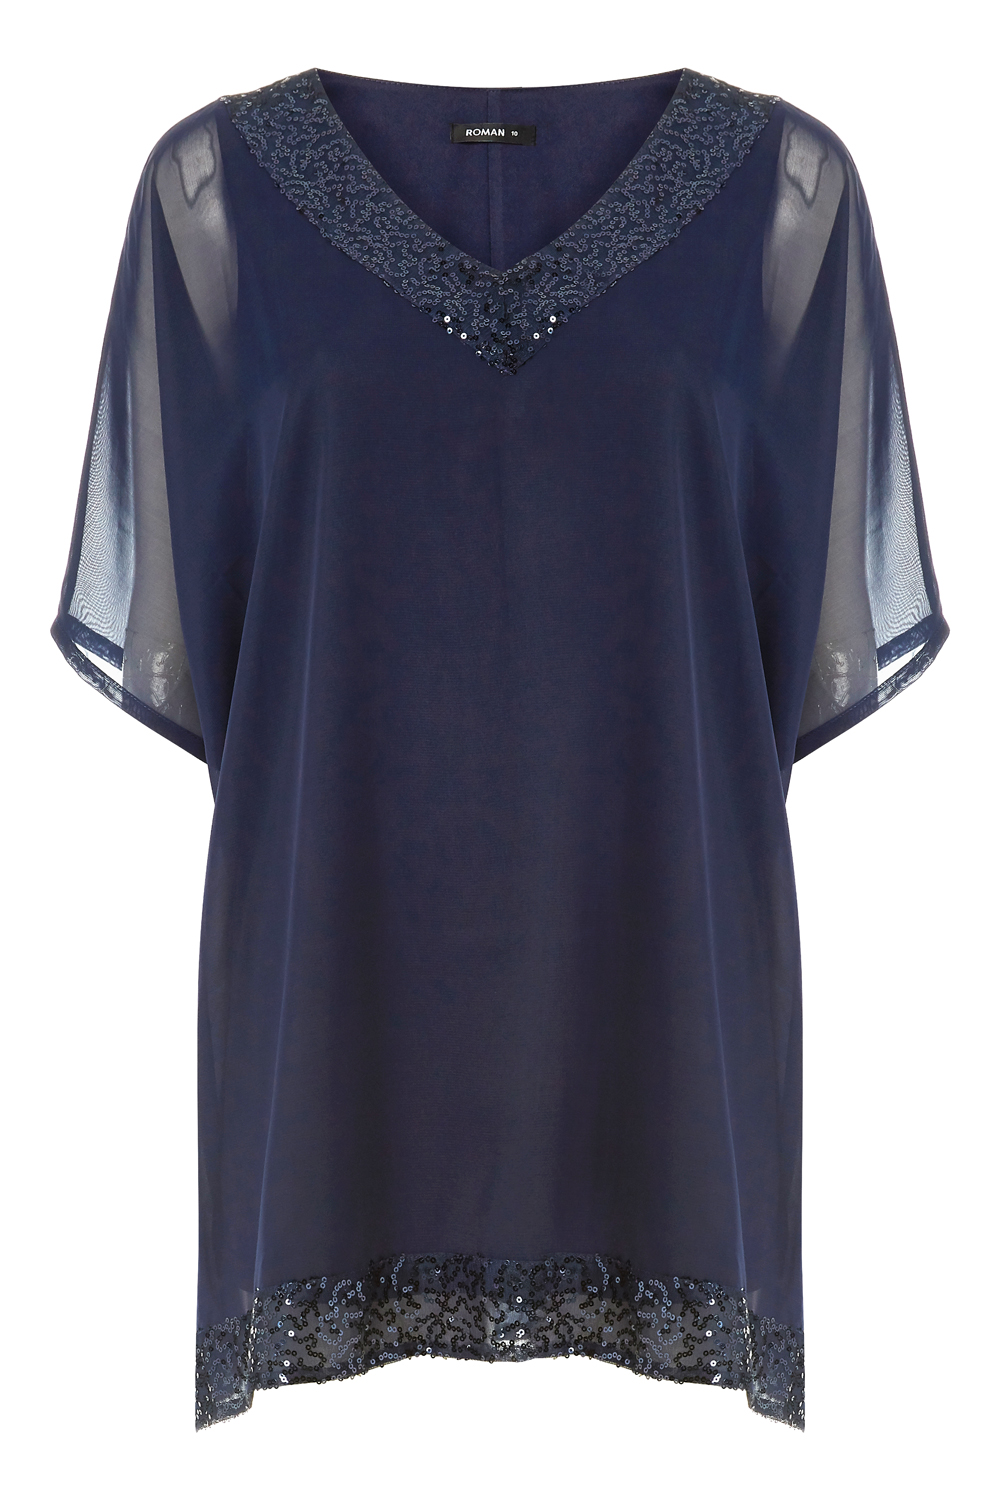 Navy  Sequin V-Neck Overlay Top, Image 5 of 5